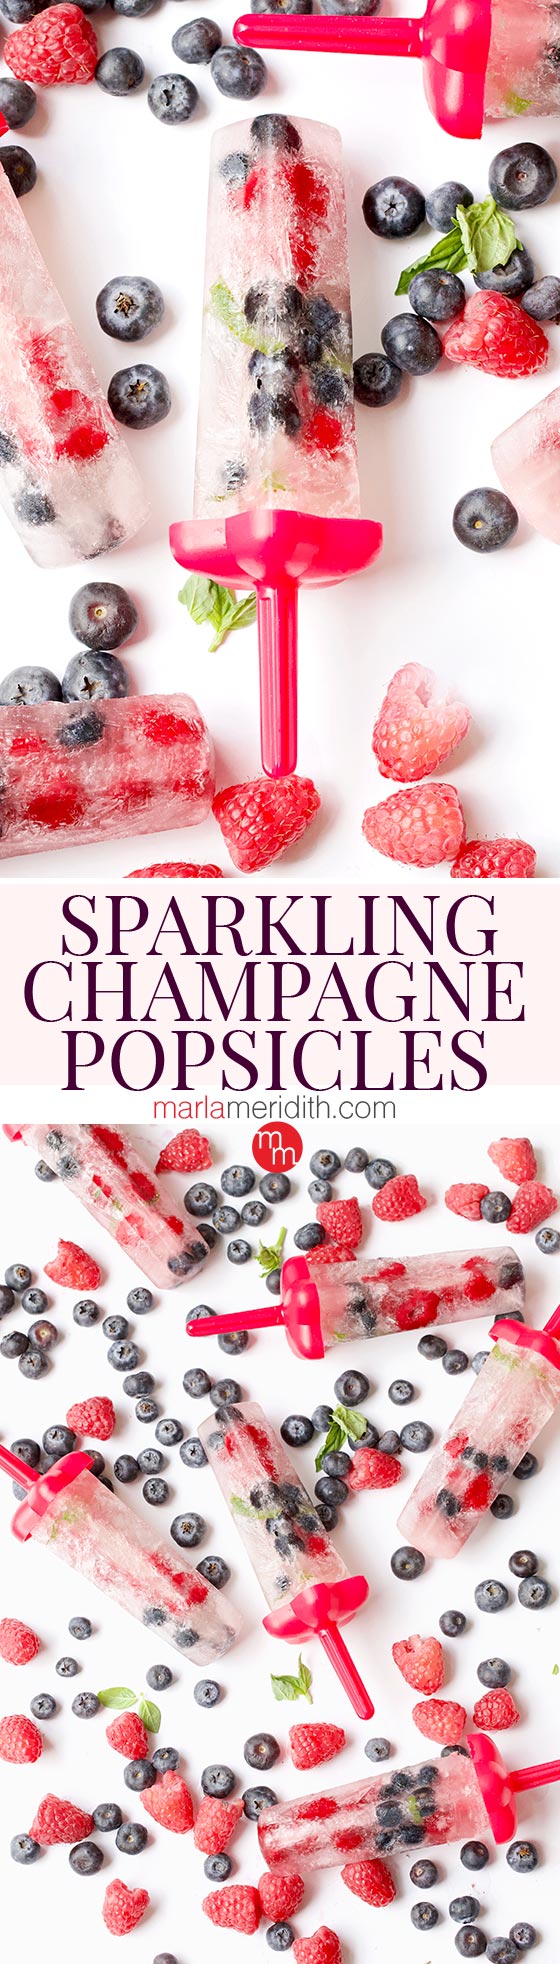 These Sparkling Champagne Popsicles will the a hit at any party or celebration. Get the recipe on MarlaMeridith.com